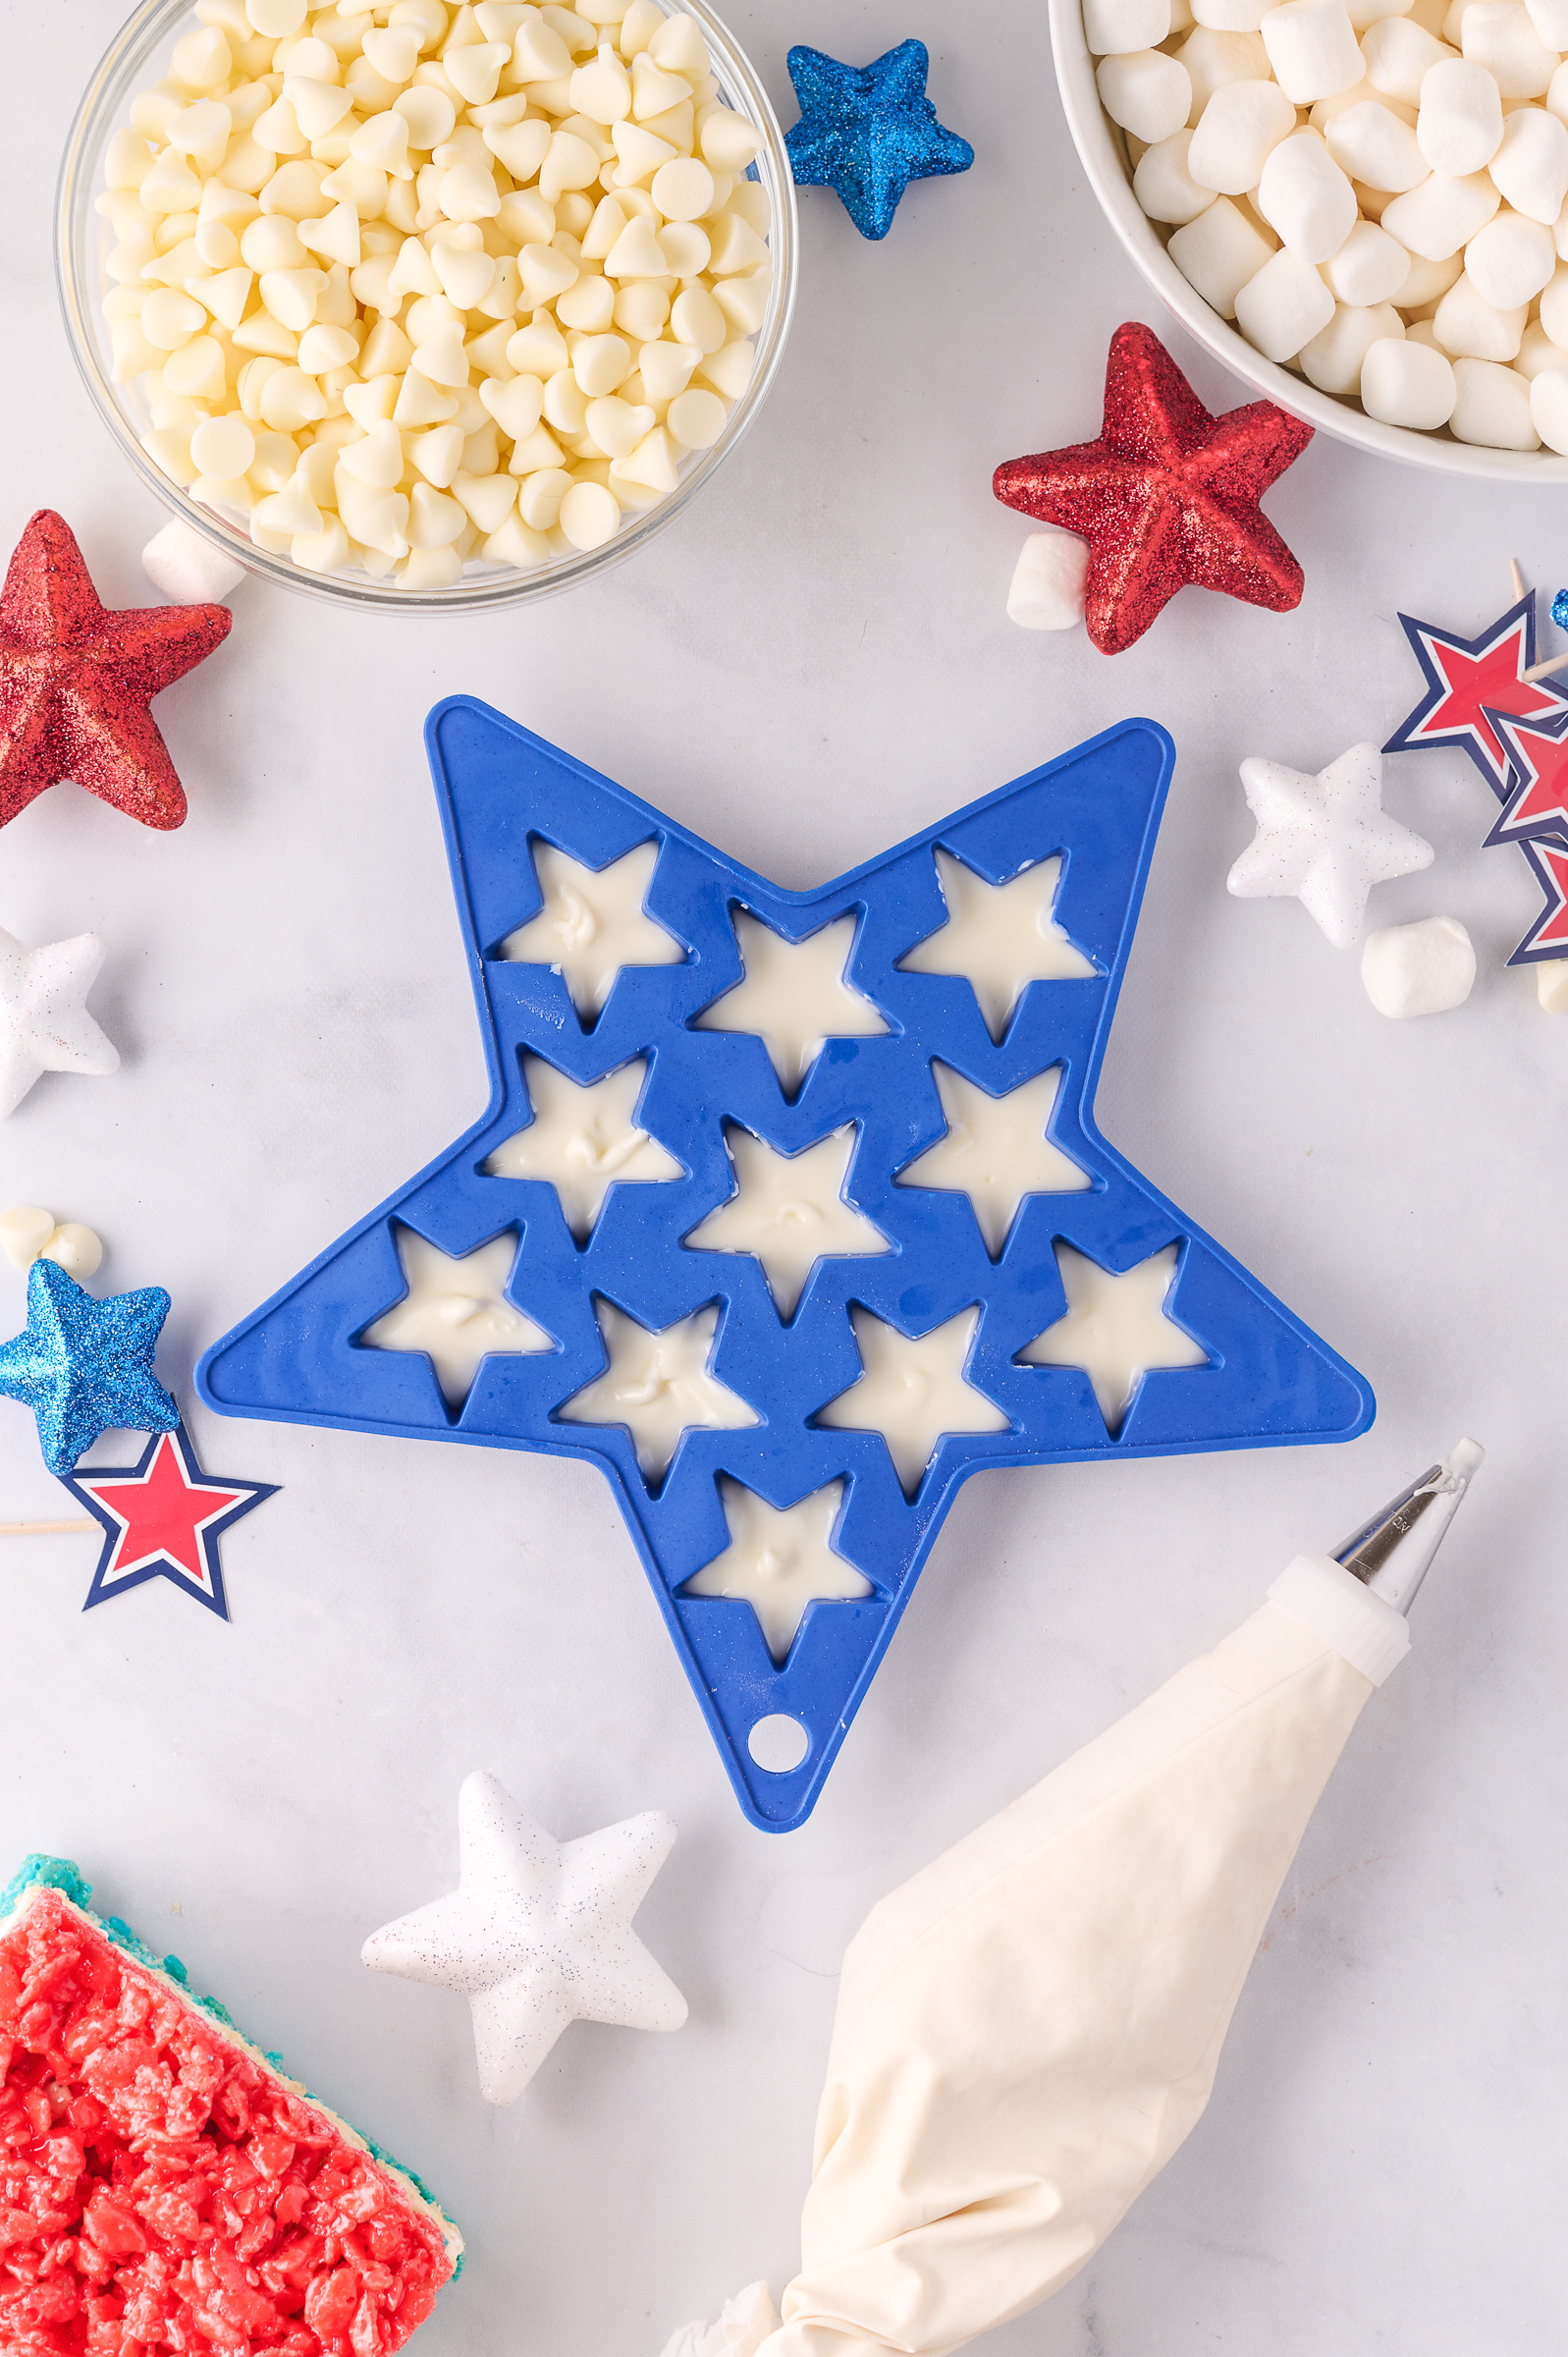 A blue star mold filled with melted white chocolate